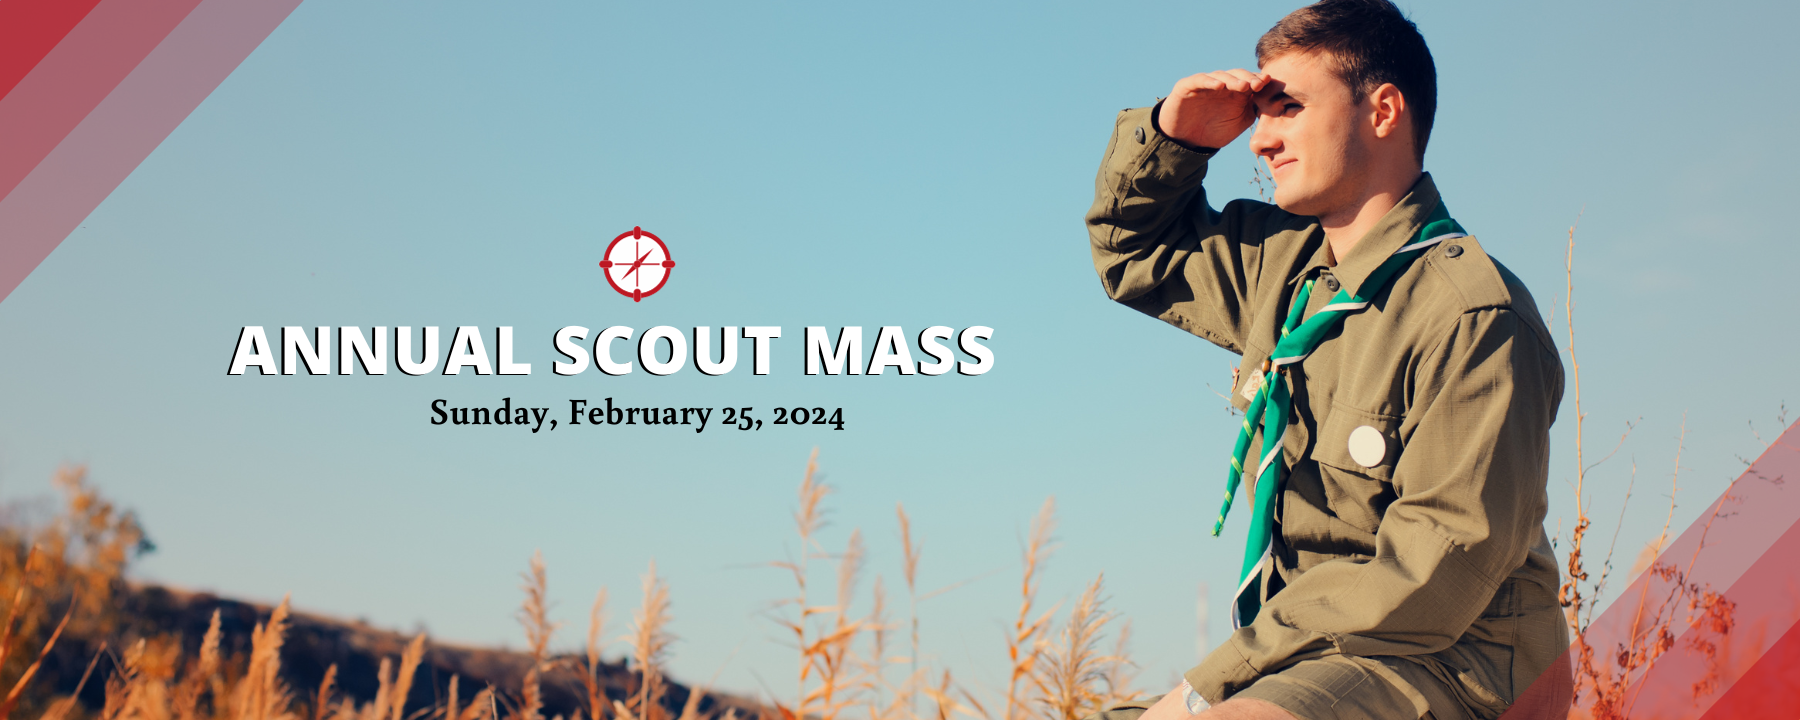 Annual Scout Mass